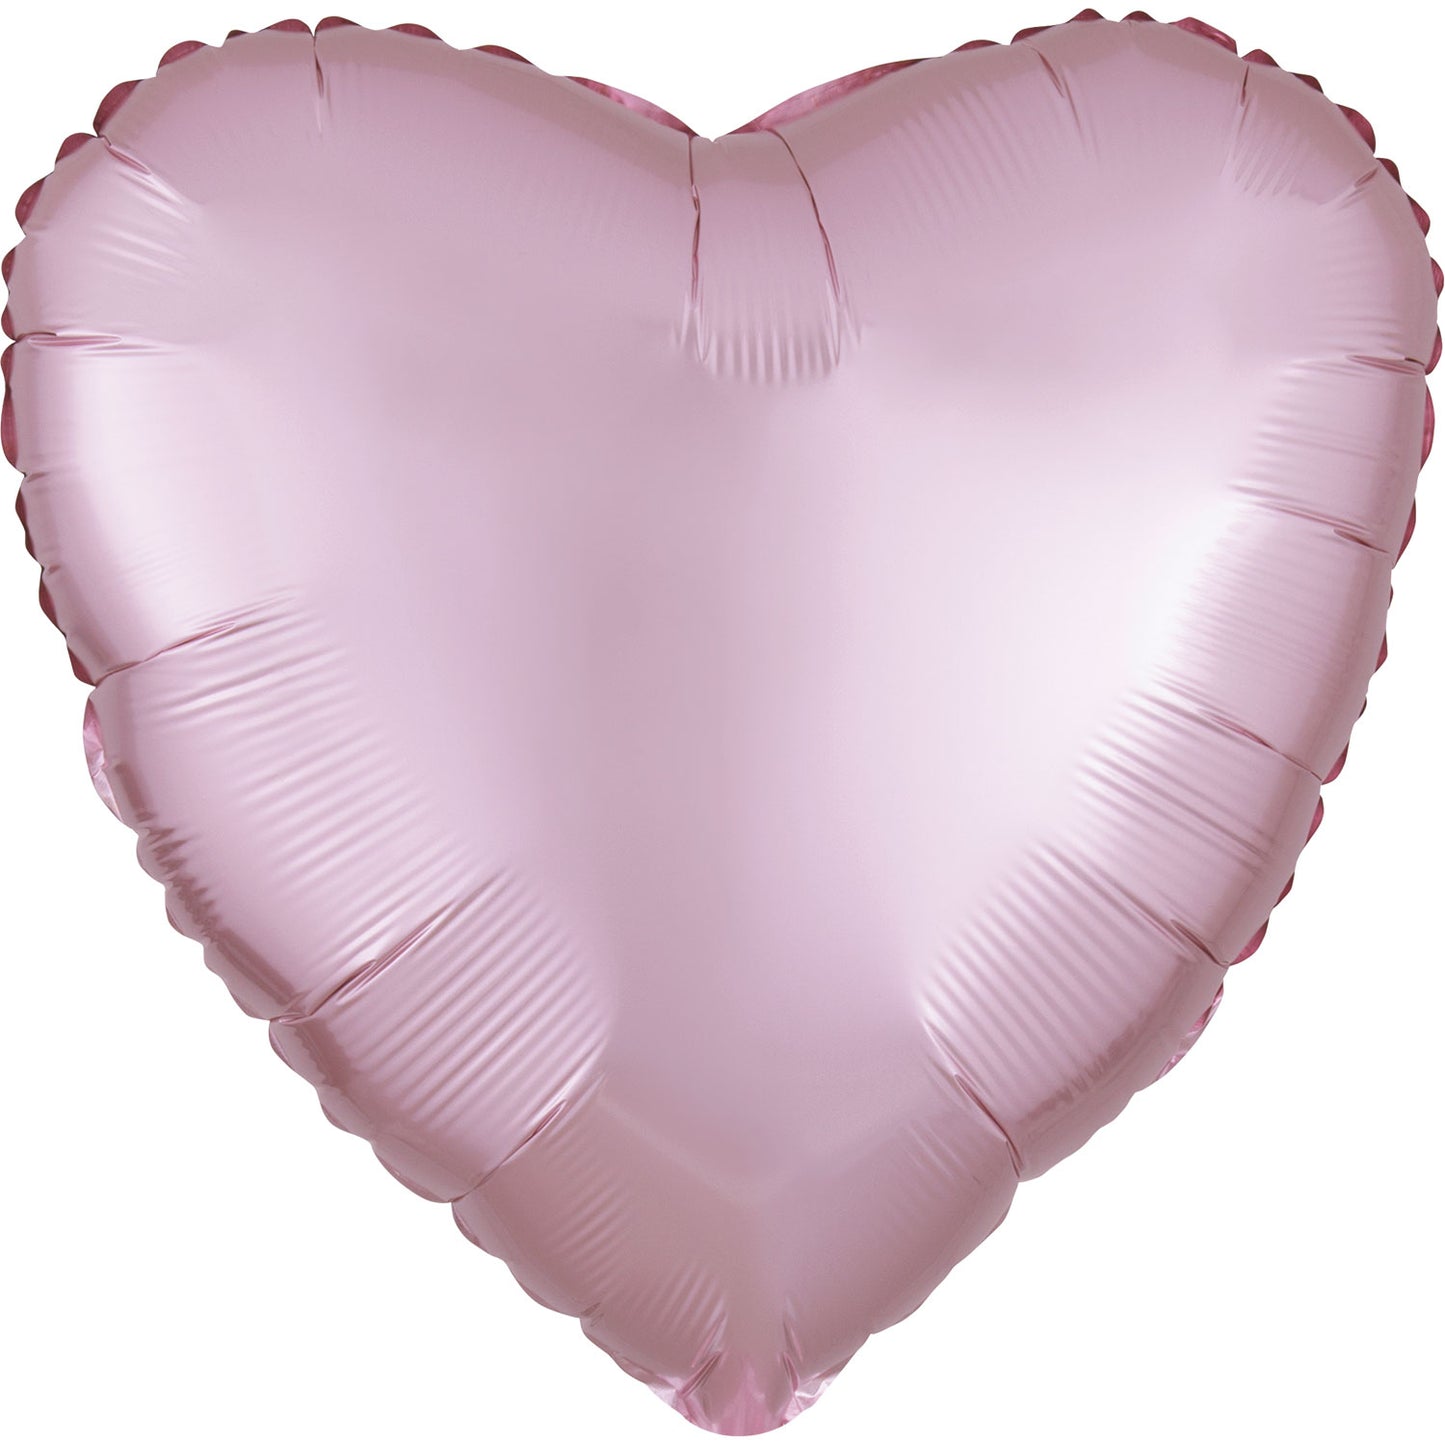 Anagram Pastel Pink Heart Satin Luxe Standard HX Unpackaged Foil Balloons S15 - 1 PC